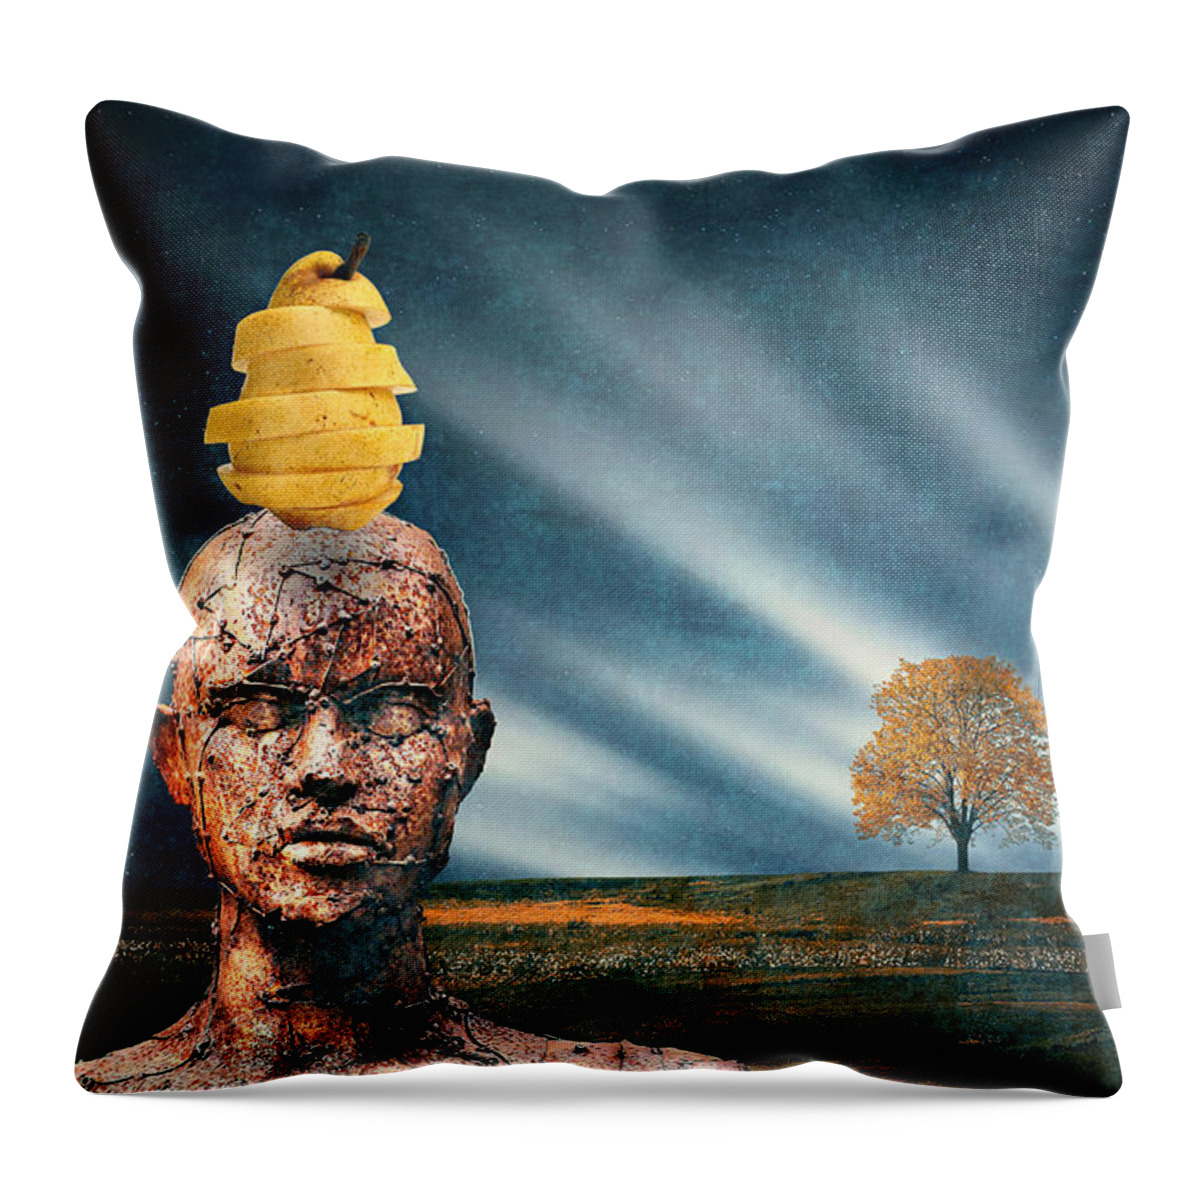 Mentally Balanced Throw Pillow featuring the digital art Mentally Balanced by Ally White